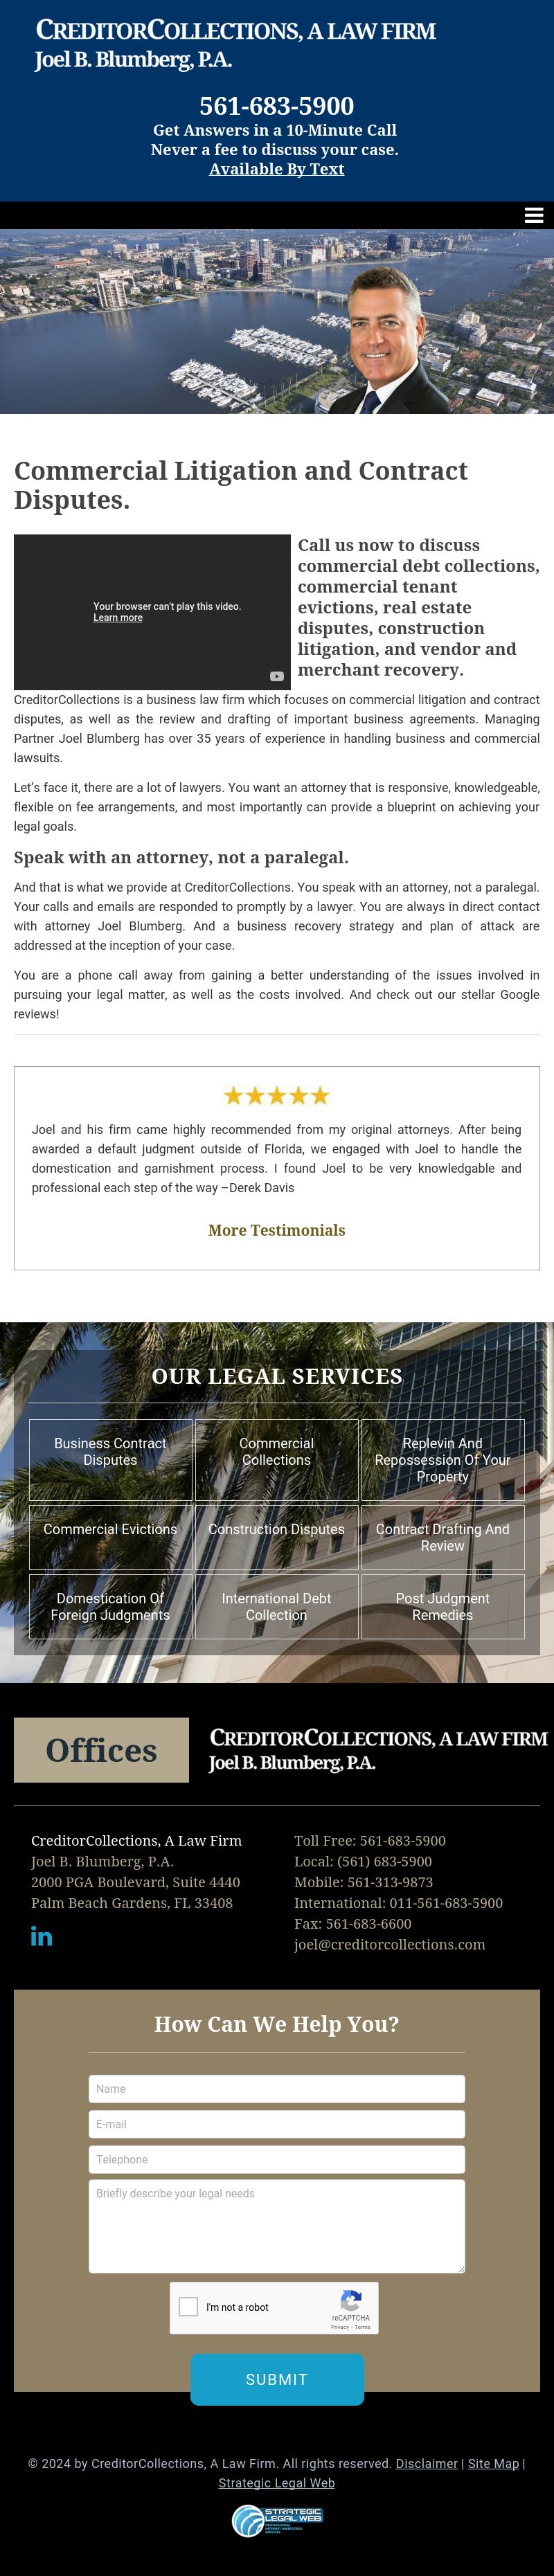 CreditorCollections, A Law Firm - West Palm Beach FL Lawyers